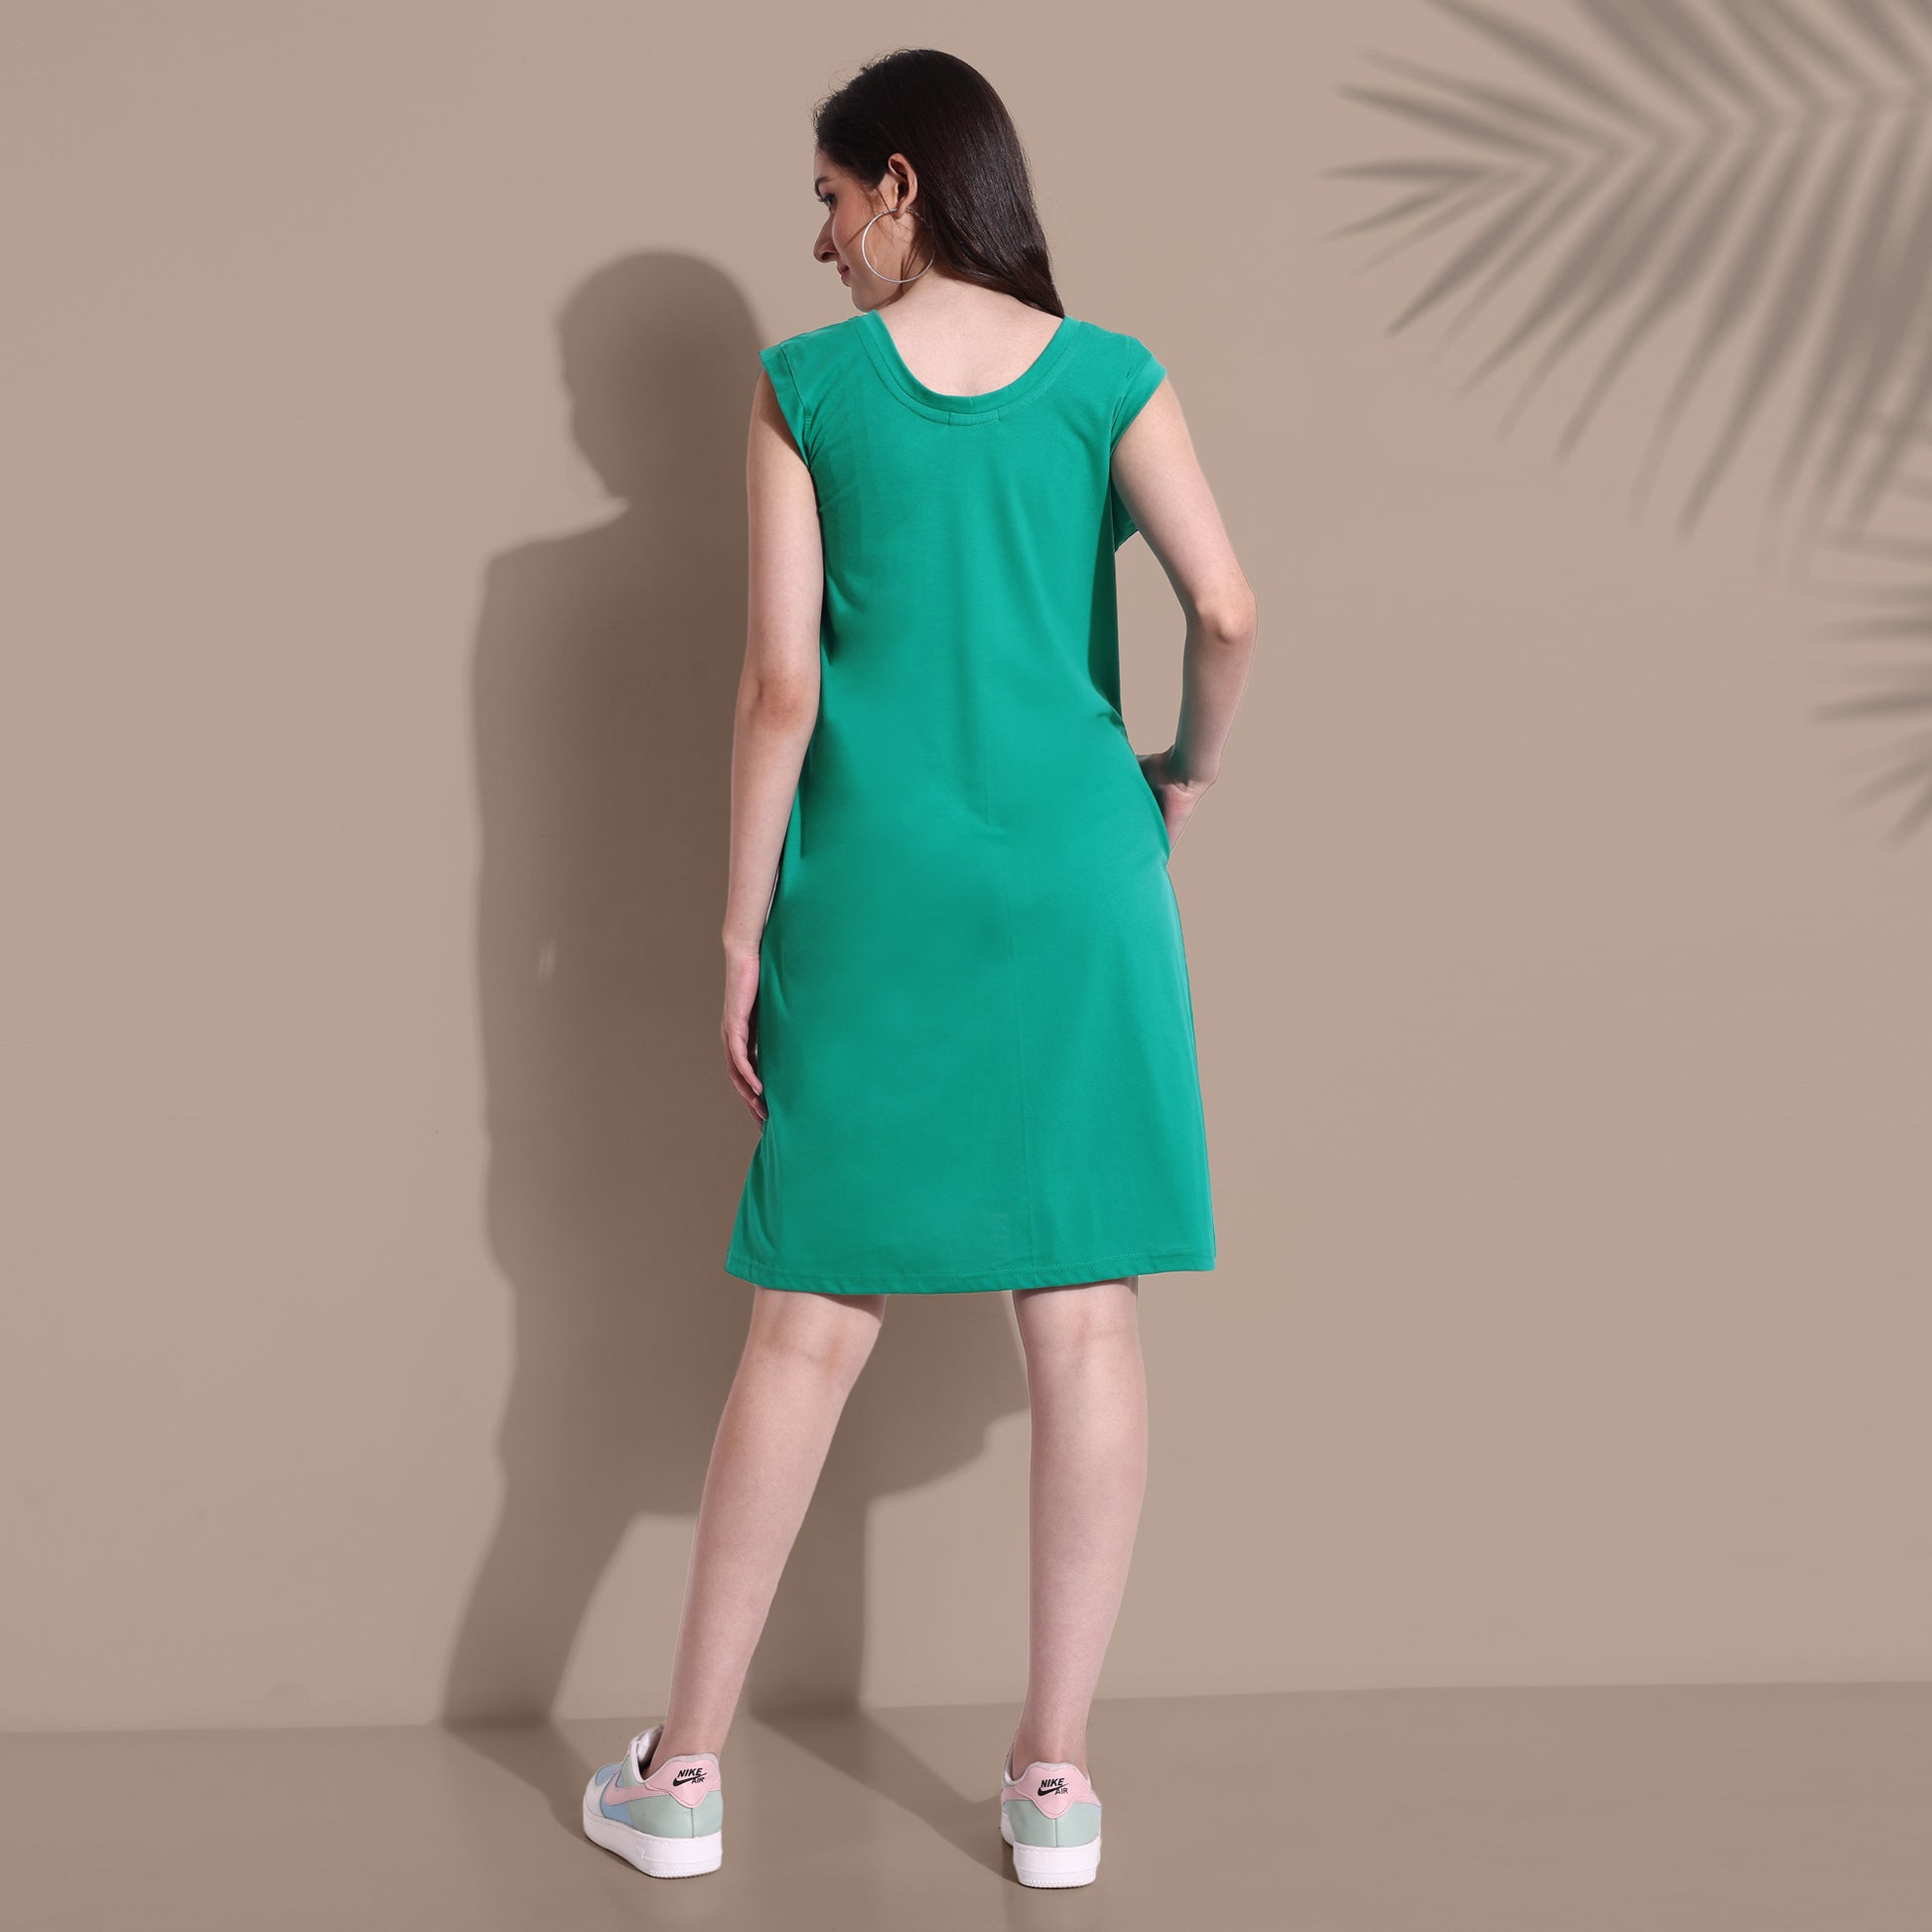 Breezy Summer Lounge Dress (Combo of 2) online in India at best prices